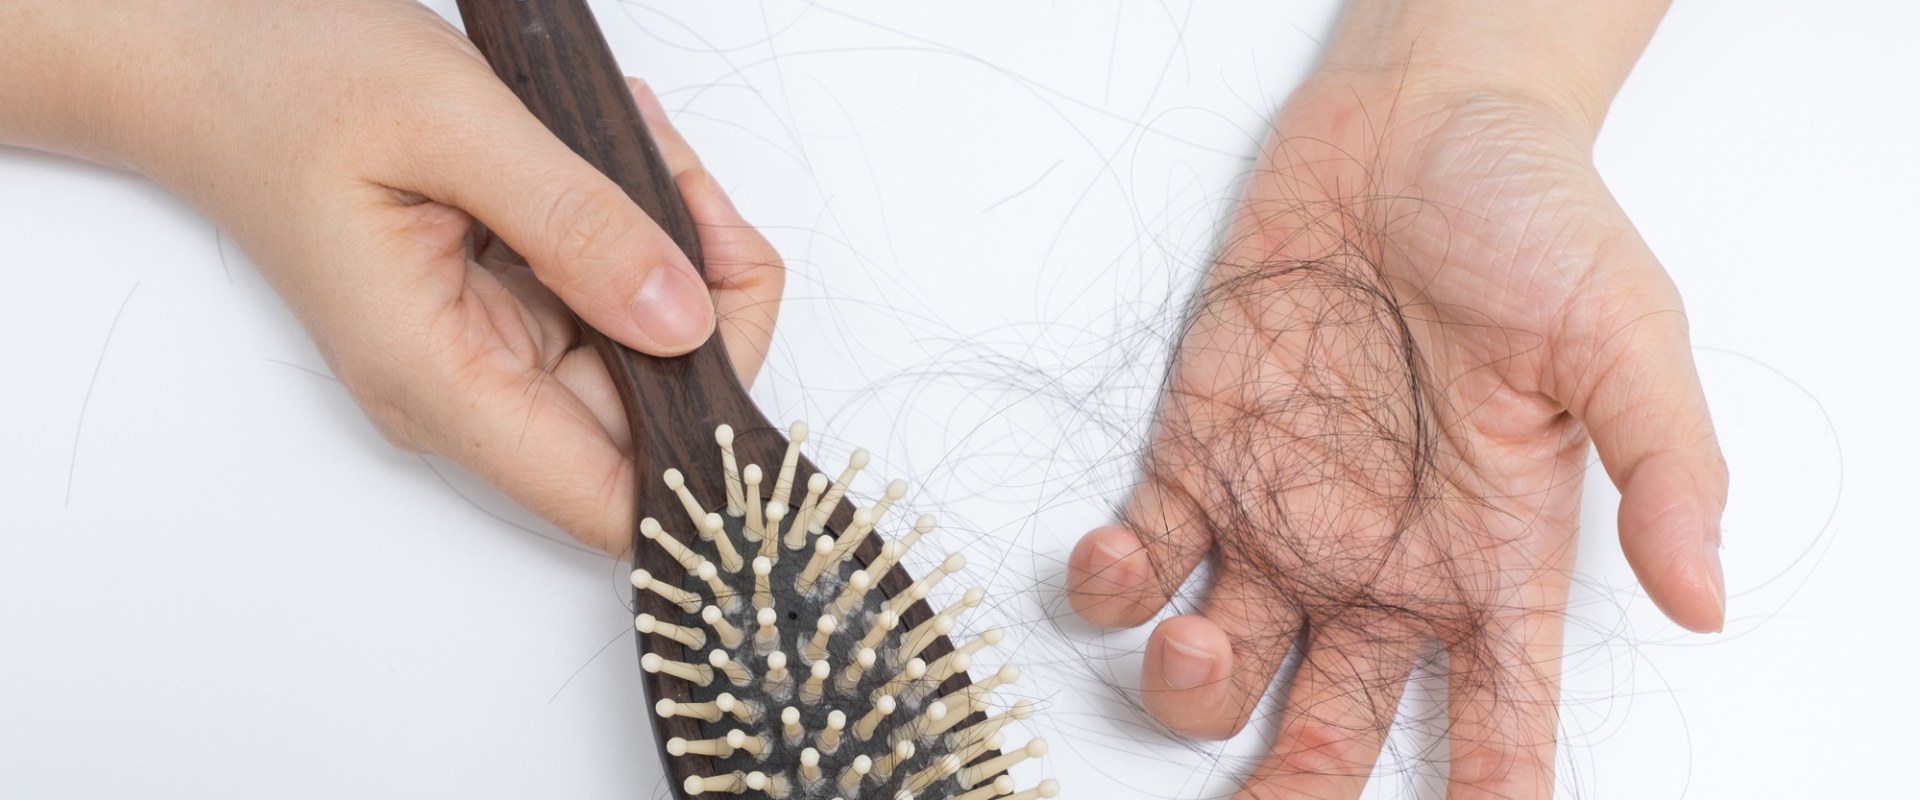 How long does it take to stop hair loss after losing weight?